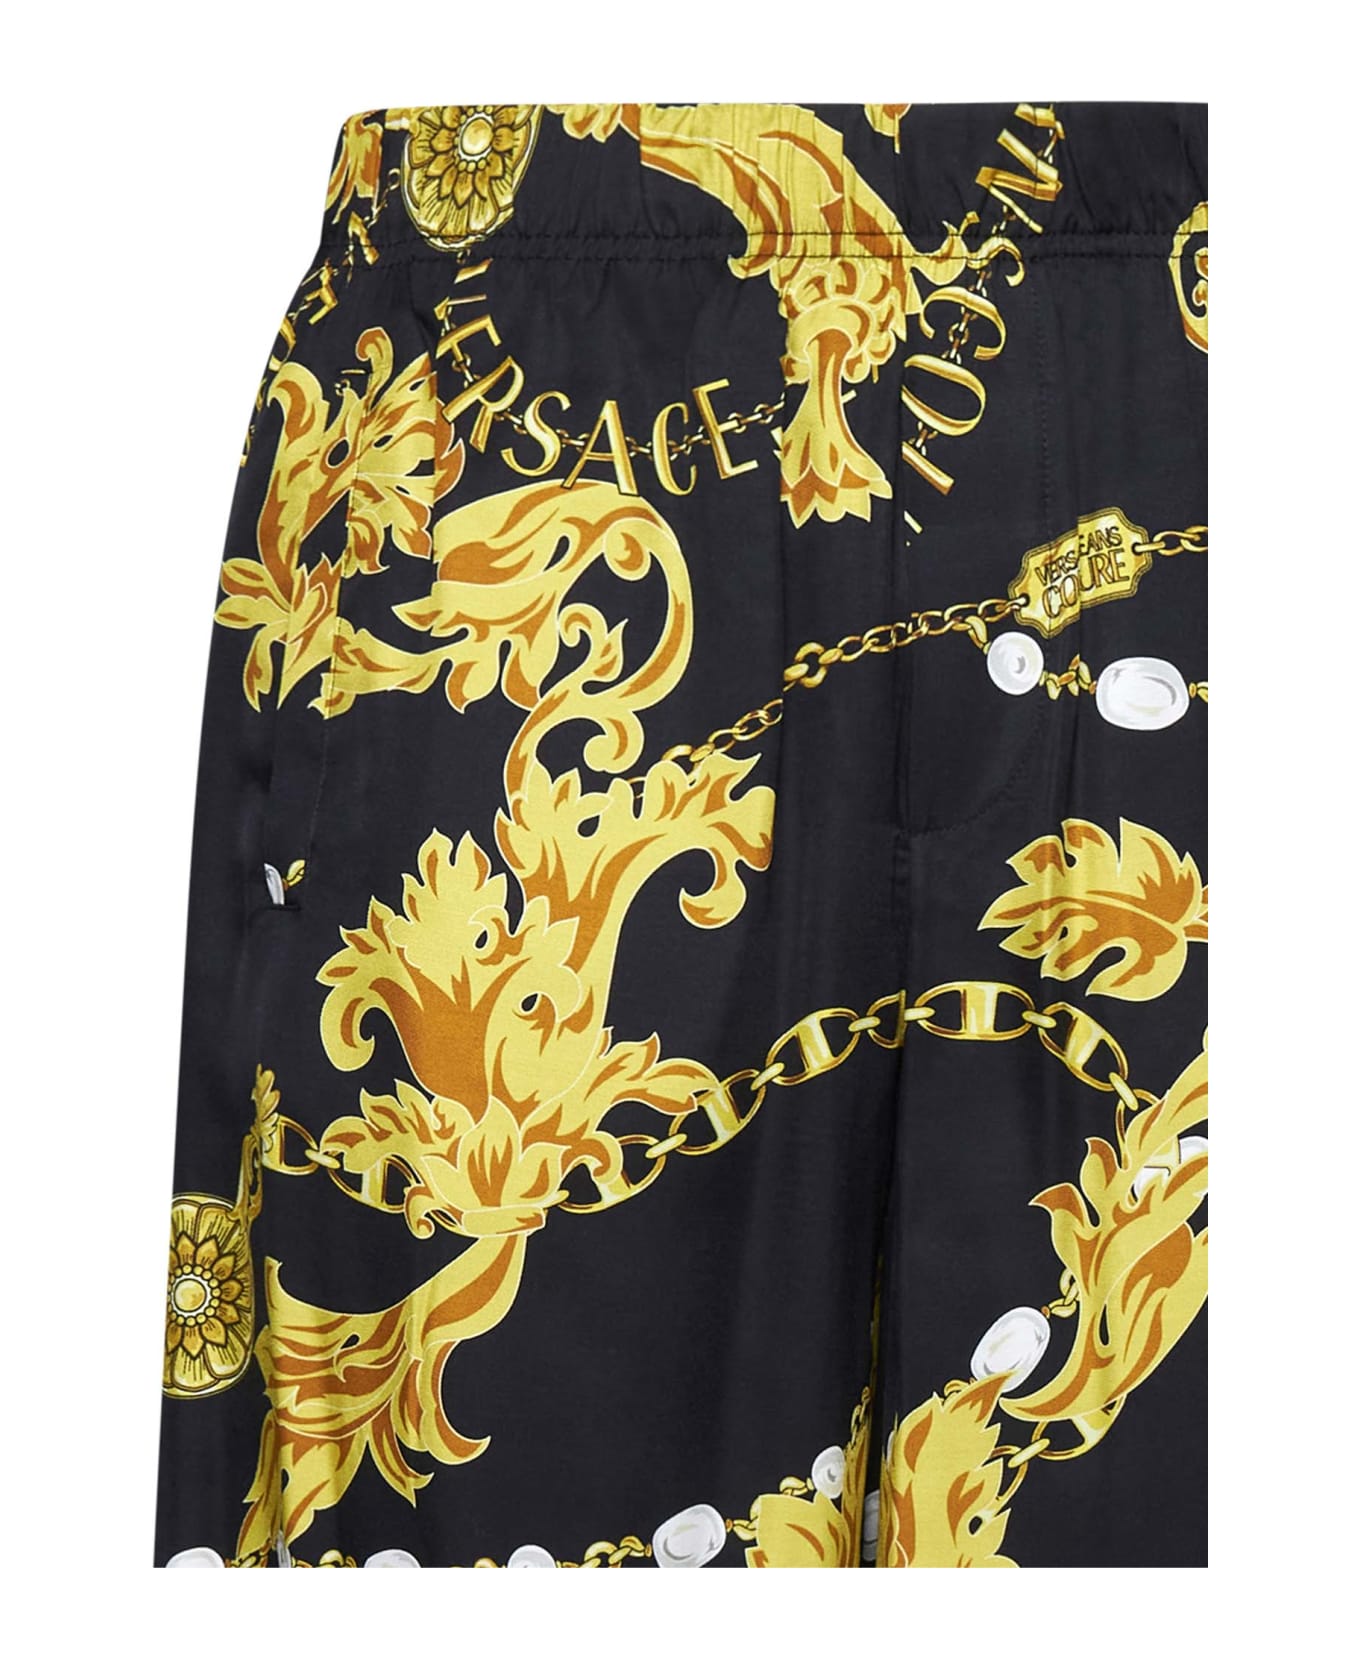 Versace Jeans Couture Chain Couture Bermuda Shorts - Black gold